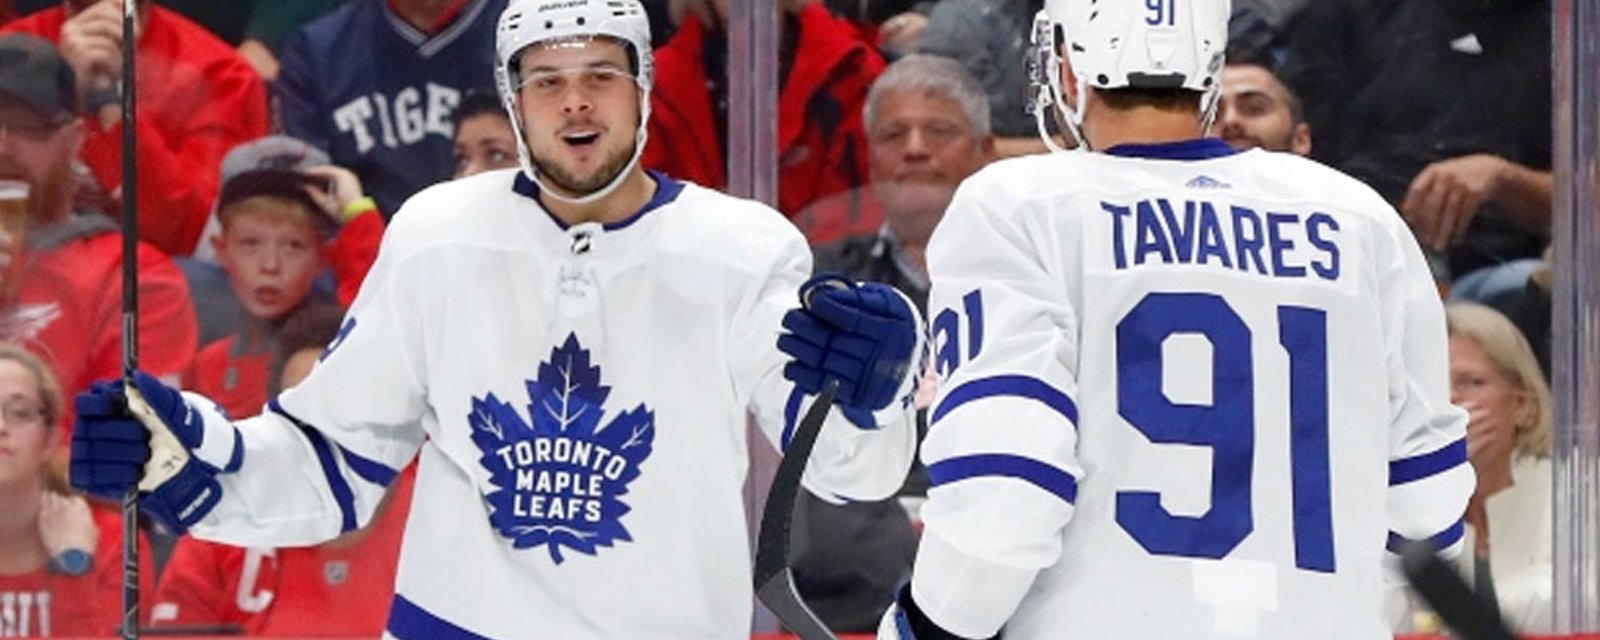 Report: Tavares and Matthews briefed on captaincy plans